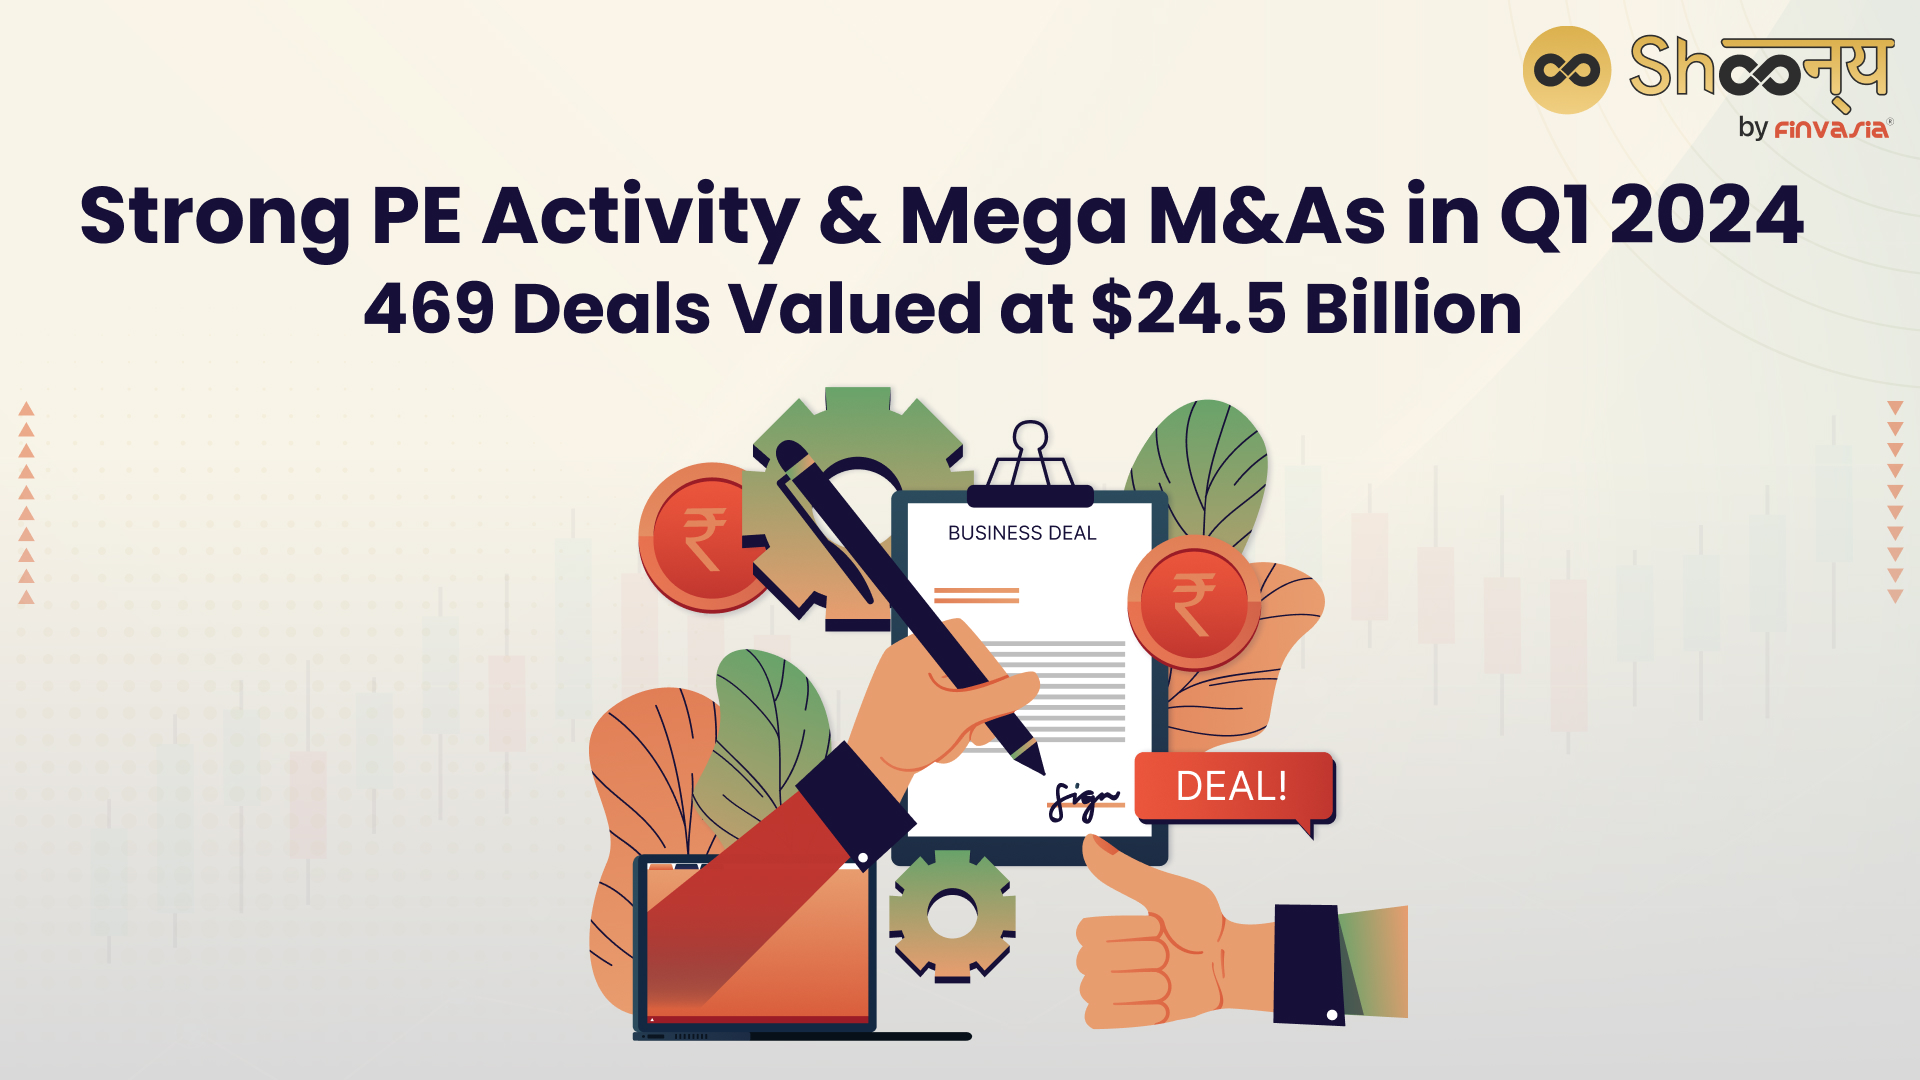 Strong PE Activity & Mega M&As in Q1 2024